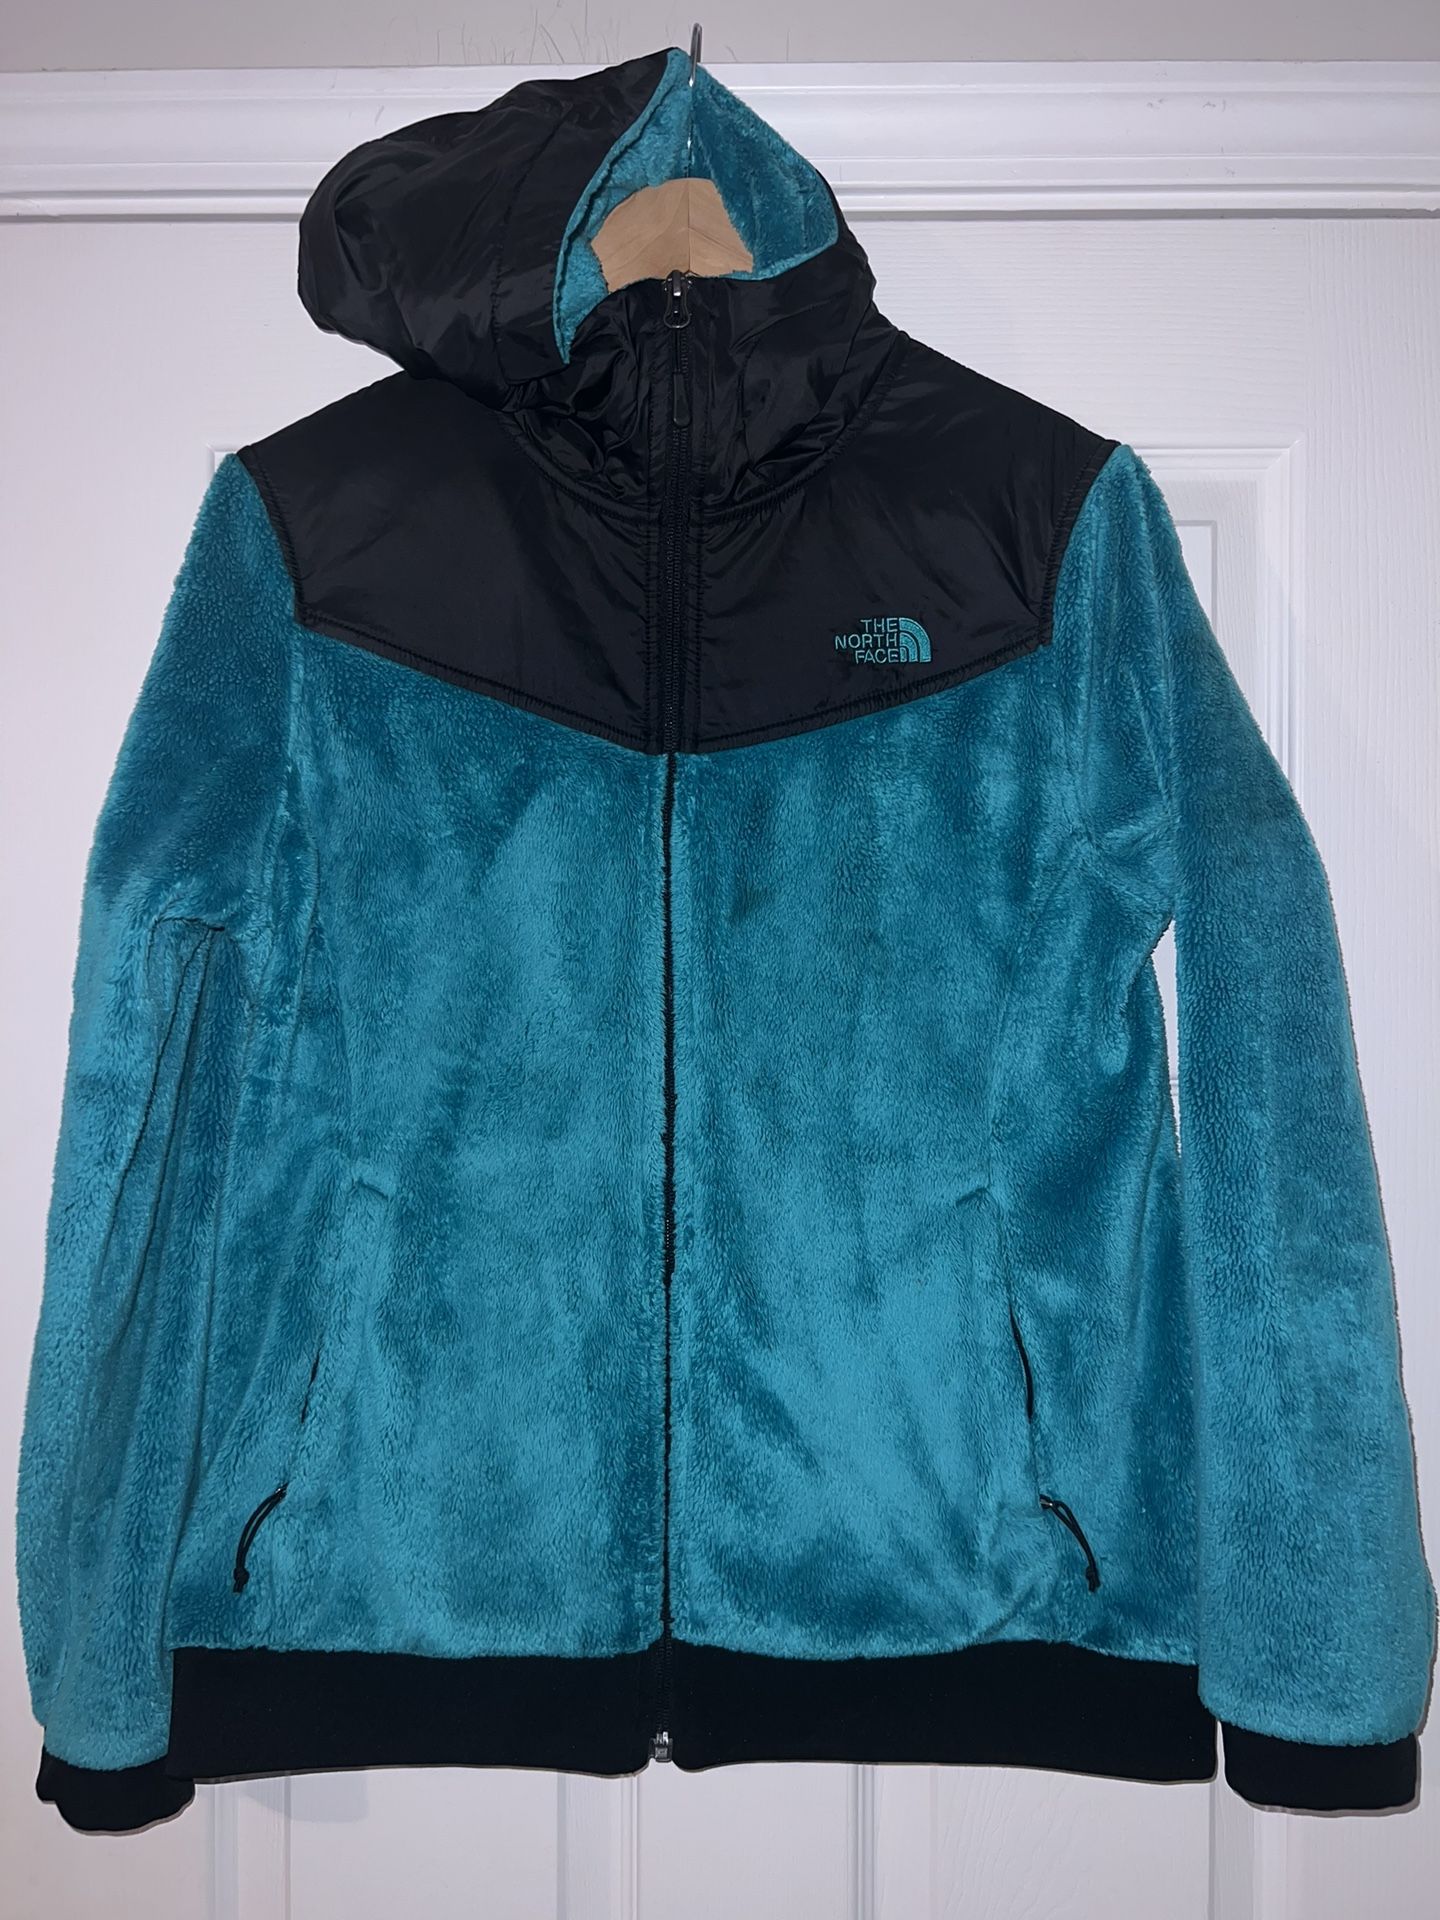 The North Face Osito Hooded Fleece Full Zip Jacket Green Womens Size L